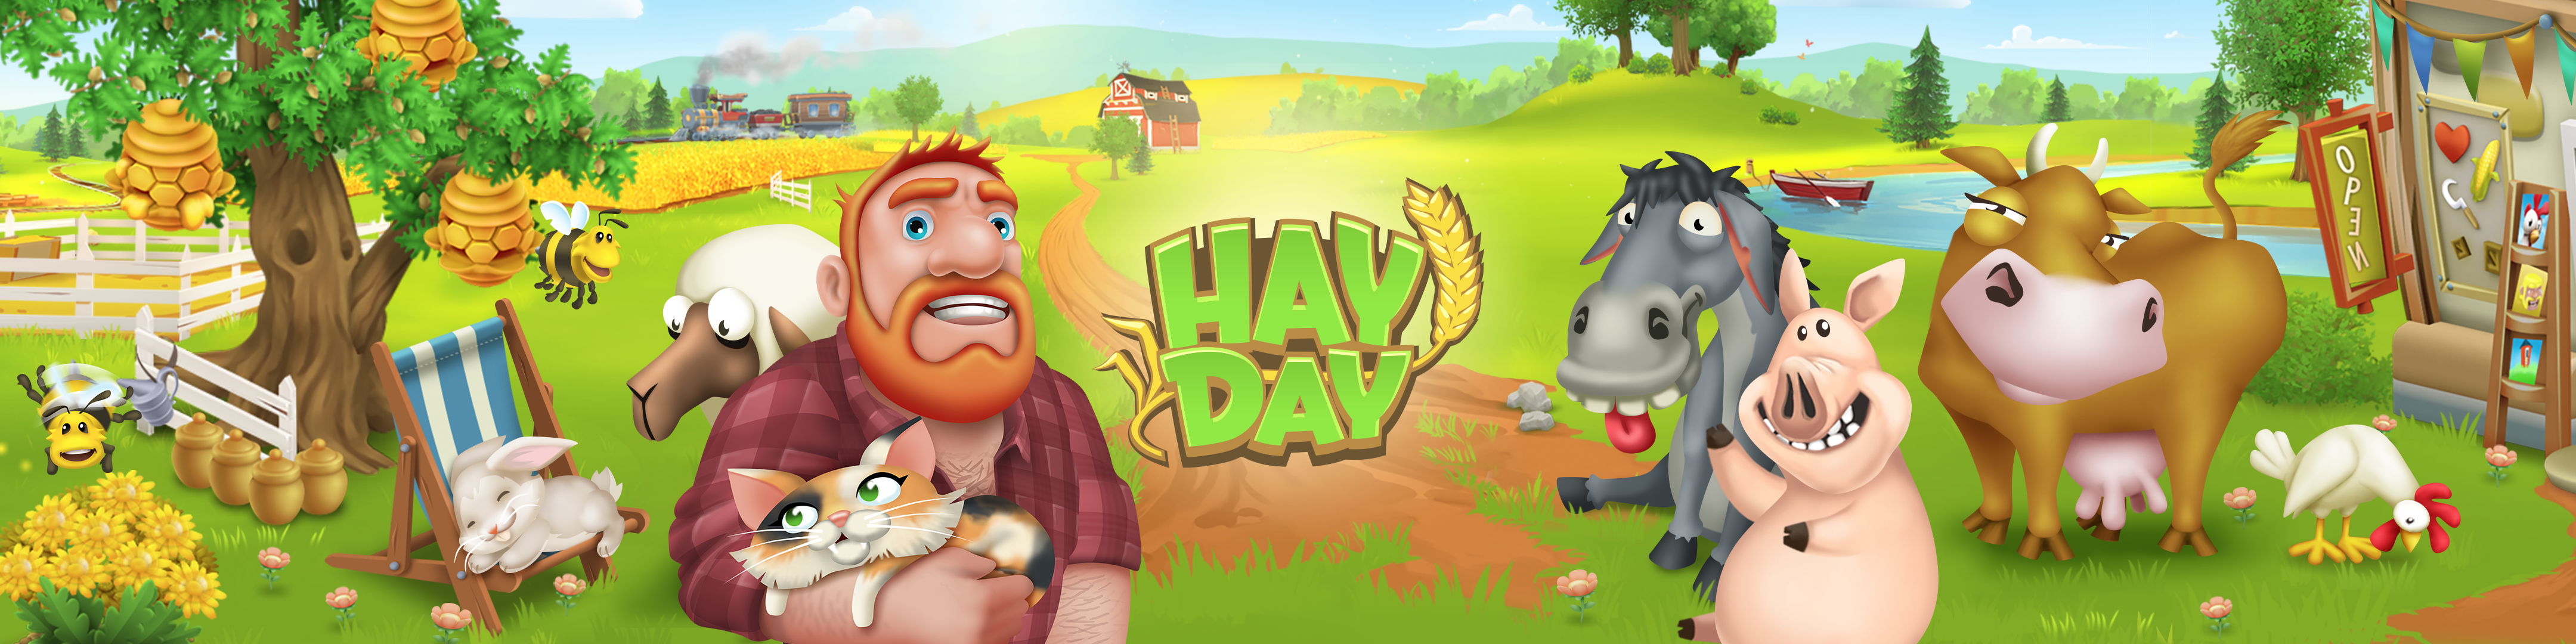 hay day 1.3.50